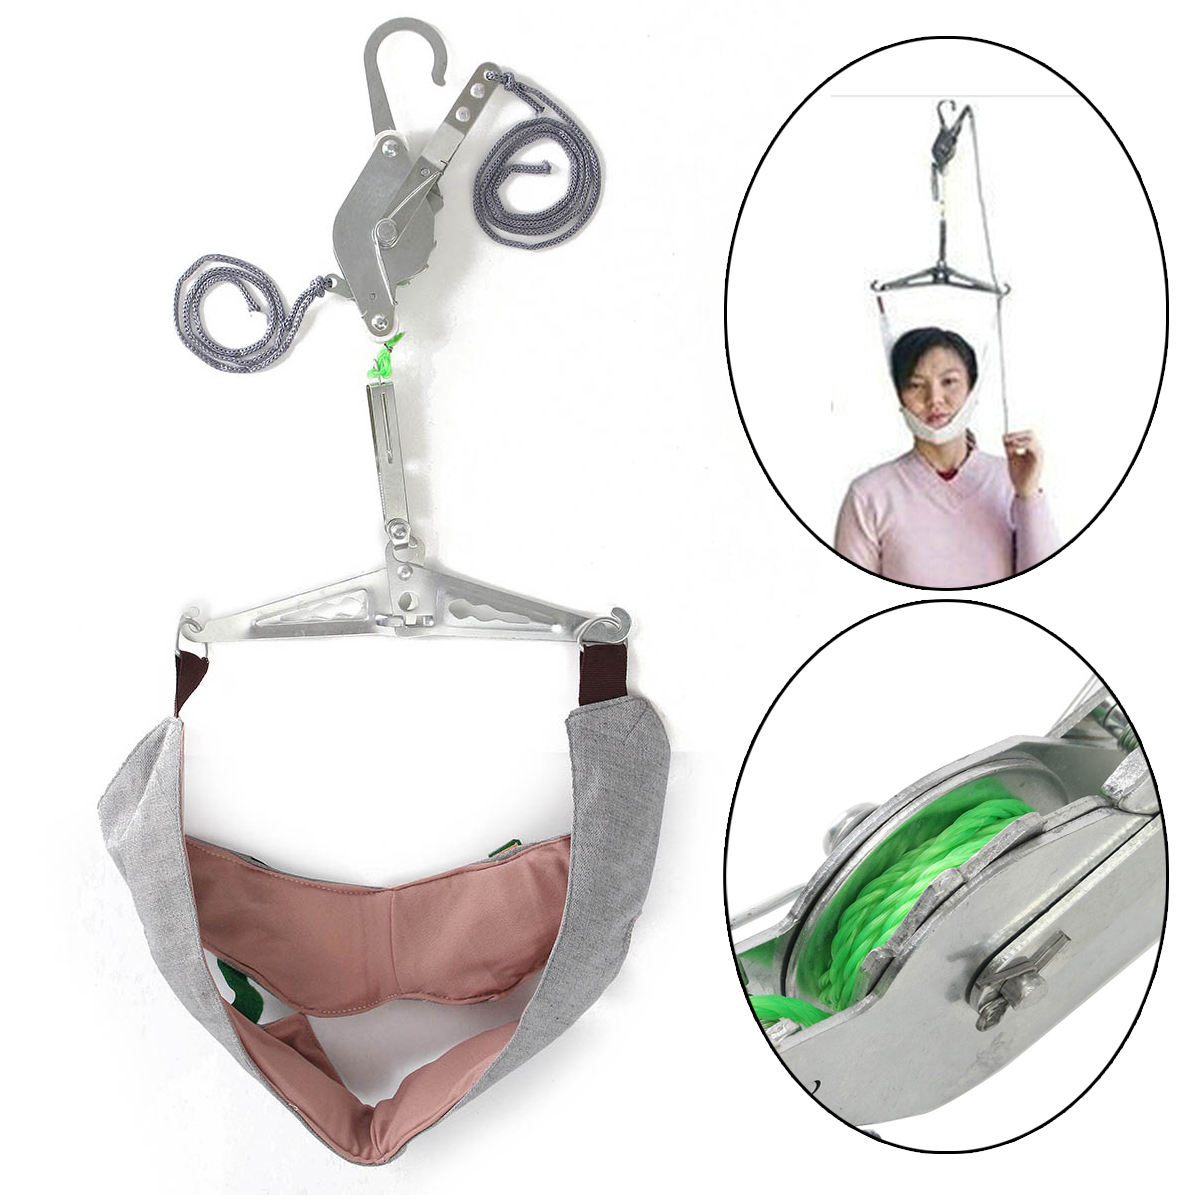 

Over Door Cervical Neck Traction Device Kit Stretch Gear Brace Pain Relief Chiropractic